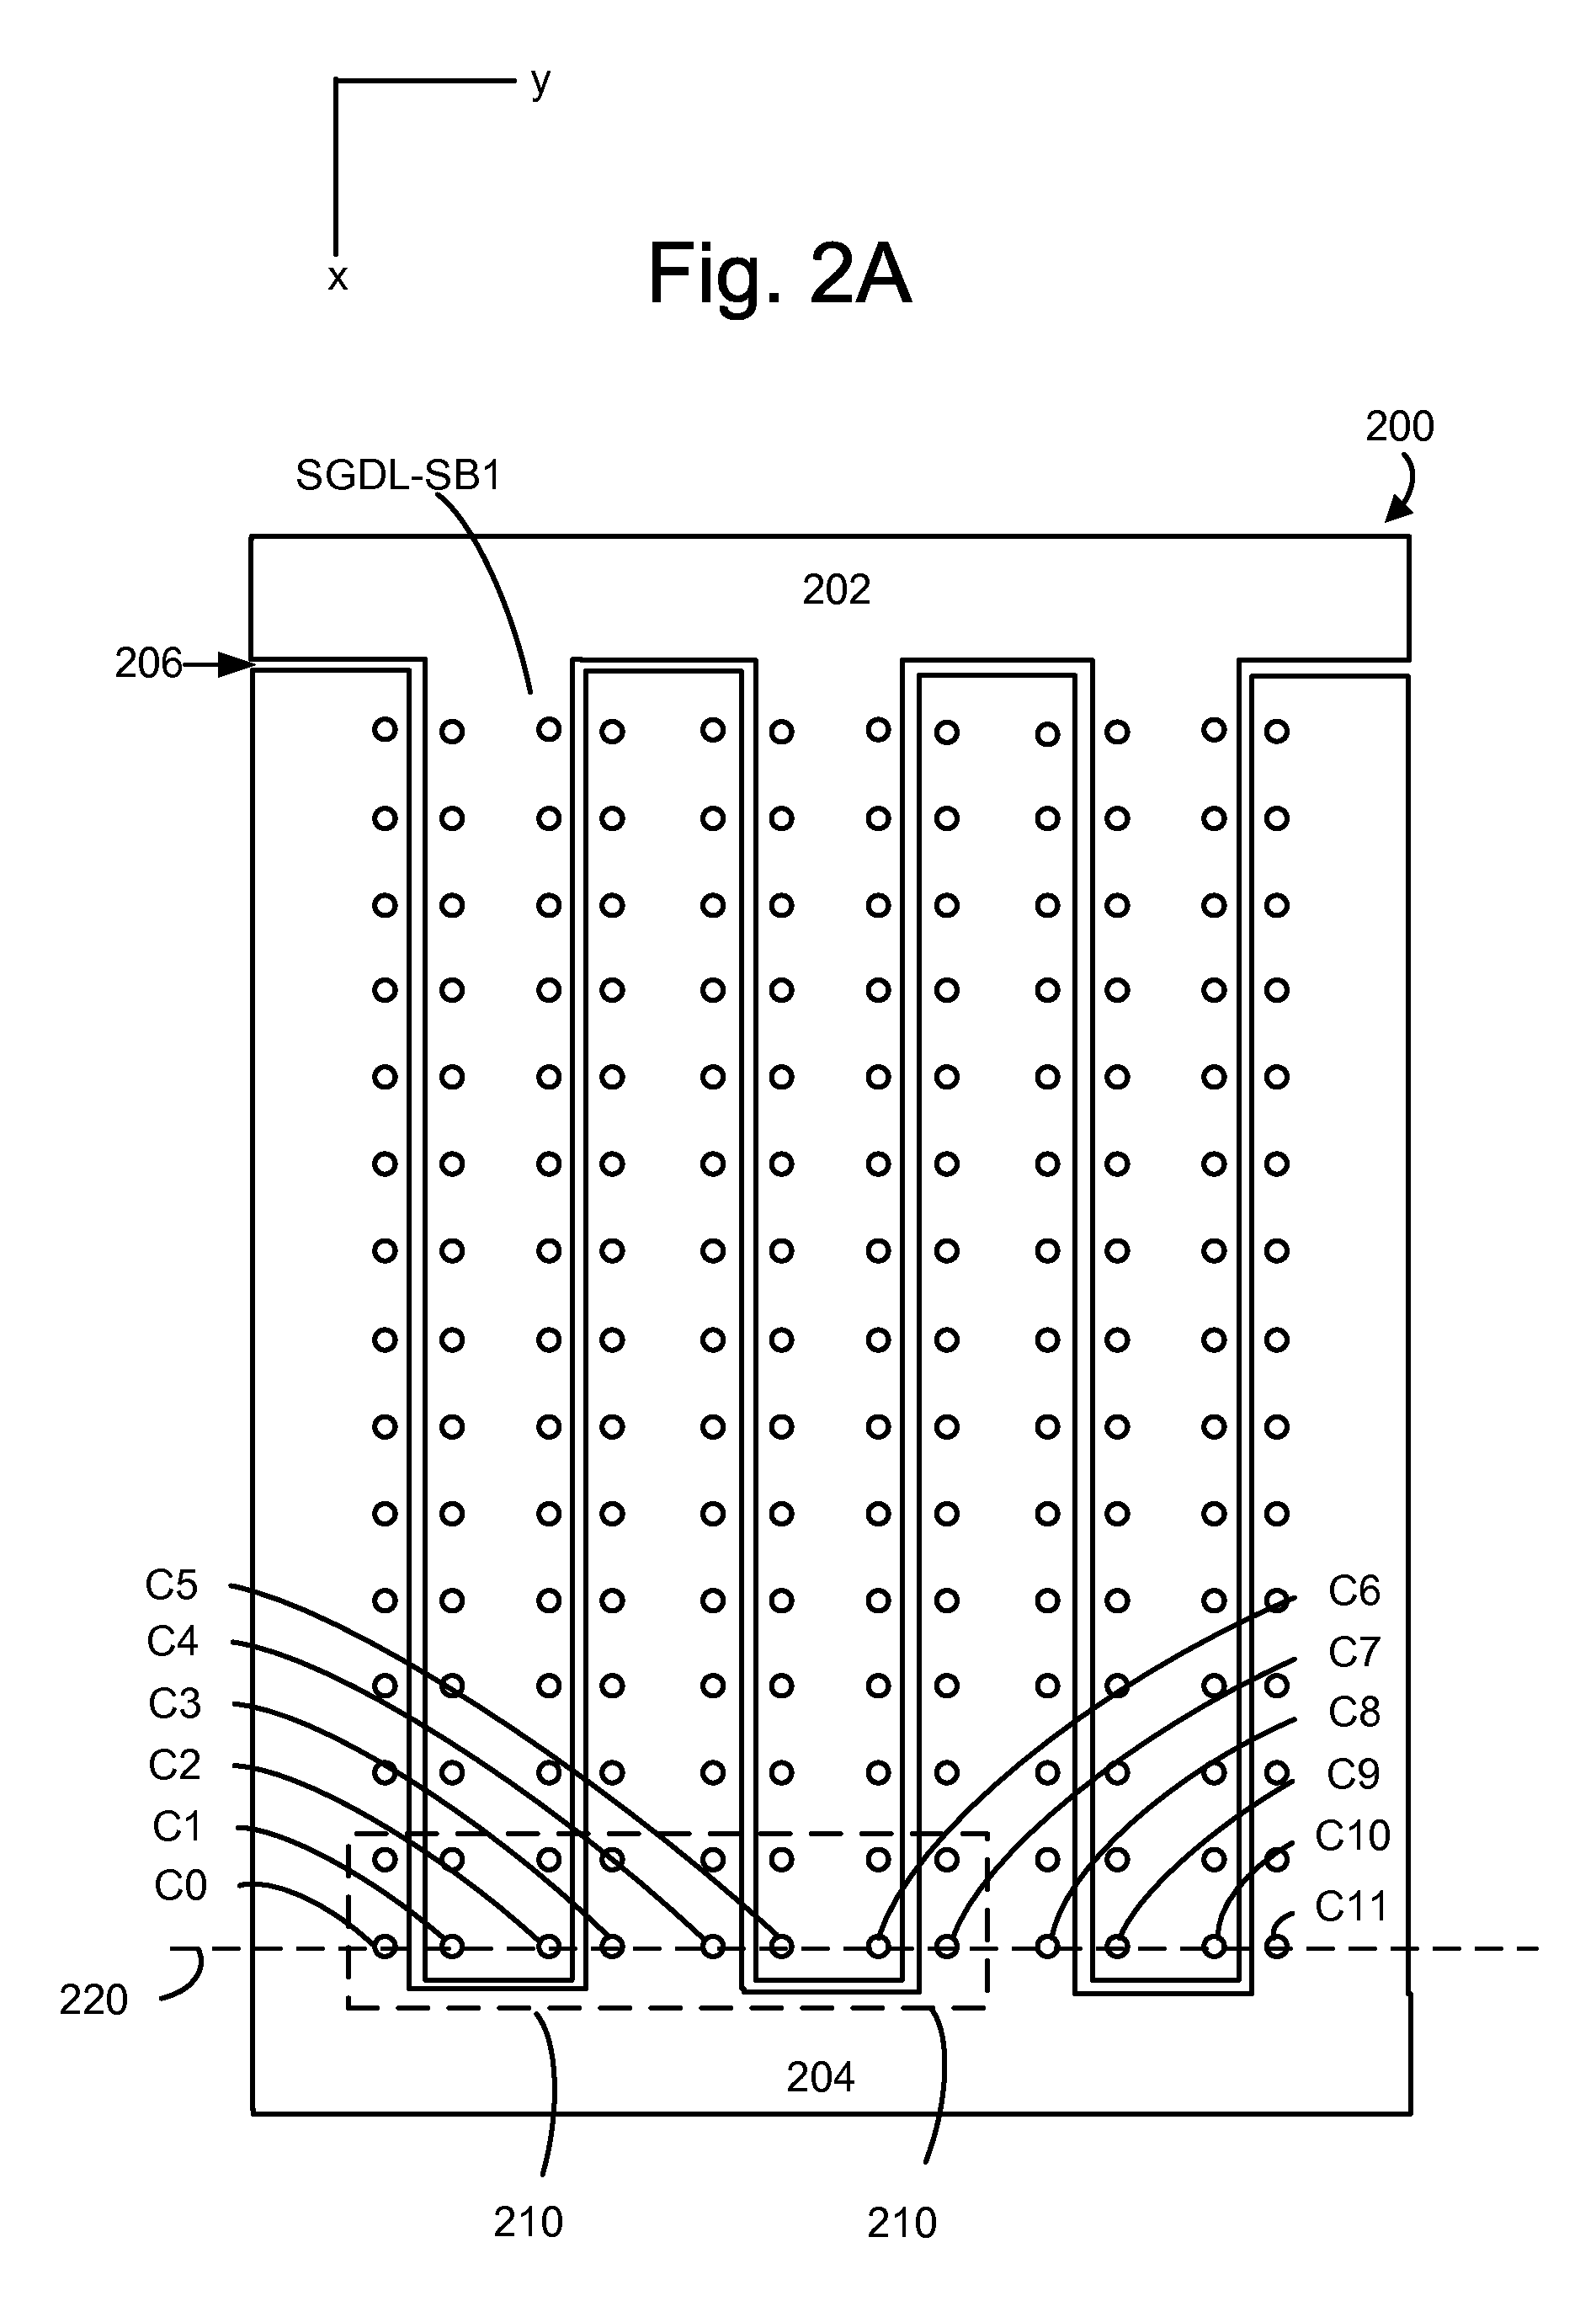 3D stacked non-volatile storage programming to conductive state